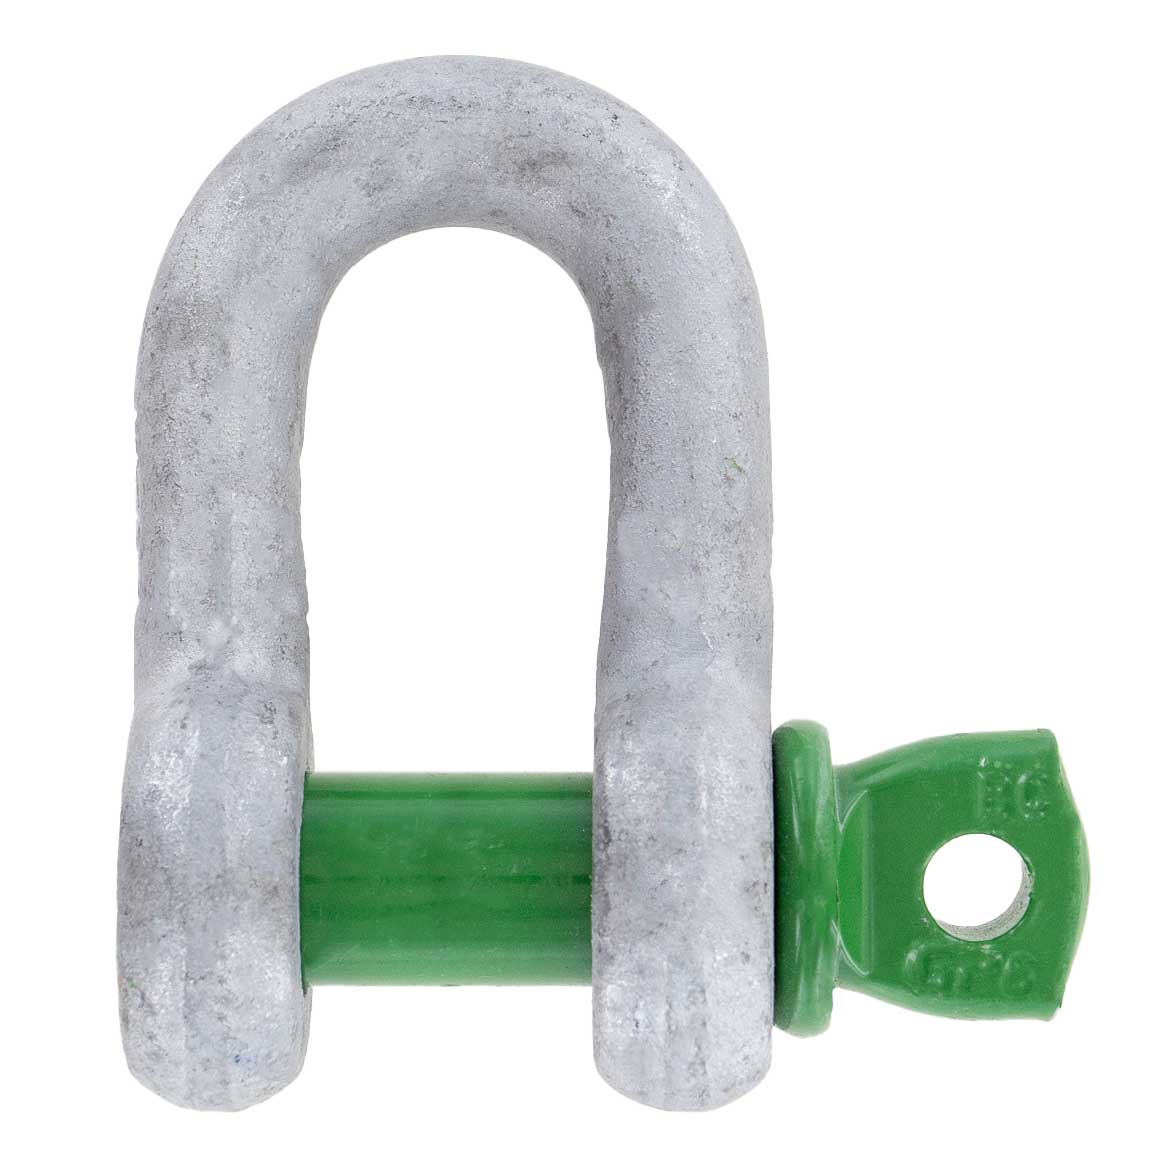 3/8" Van Beest Green Pin® Screw Pin Chain Shackle | G-4151 - 1 Ton primary image